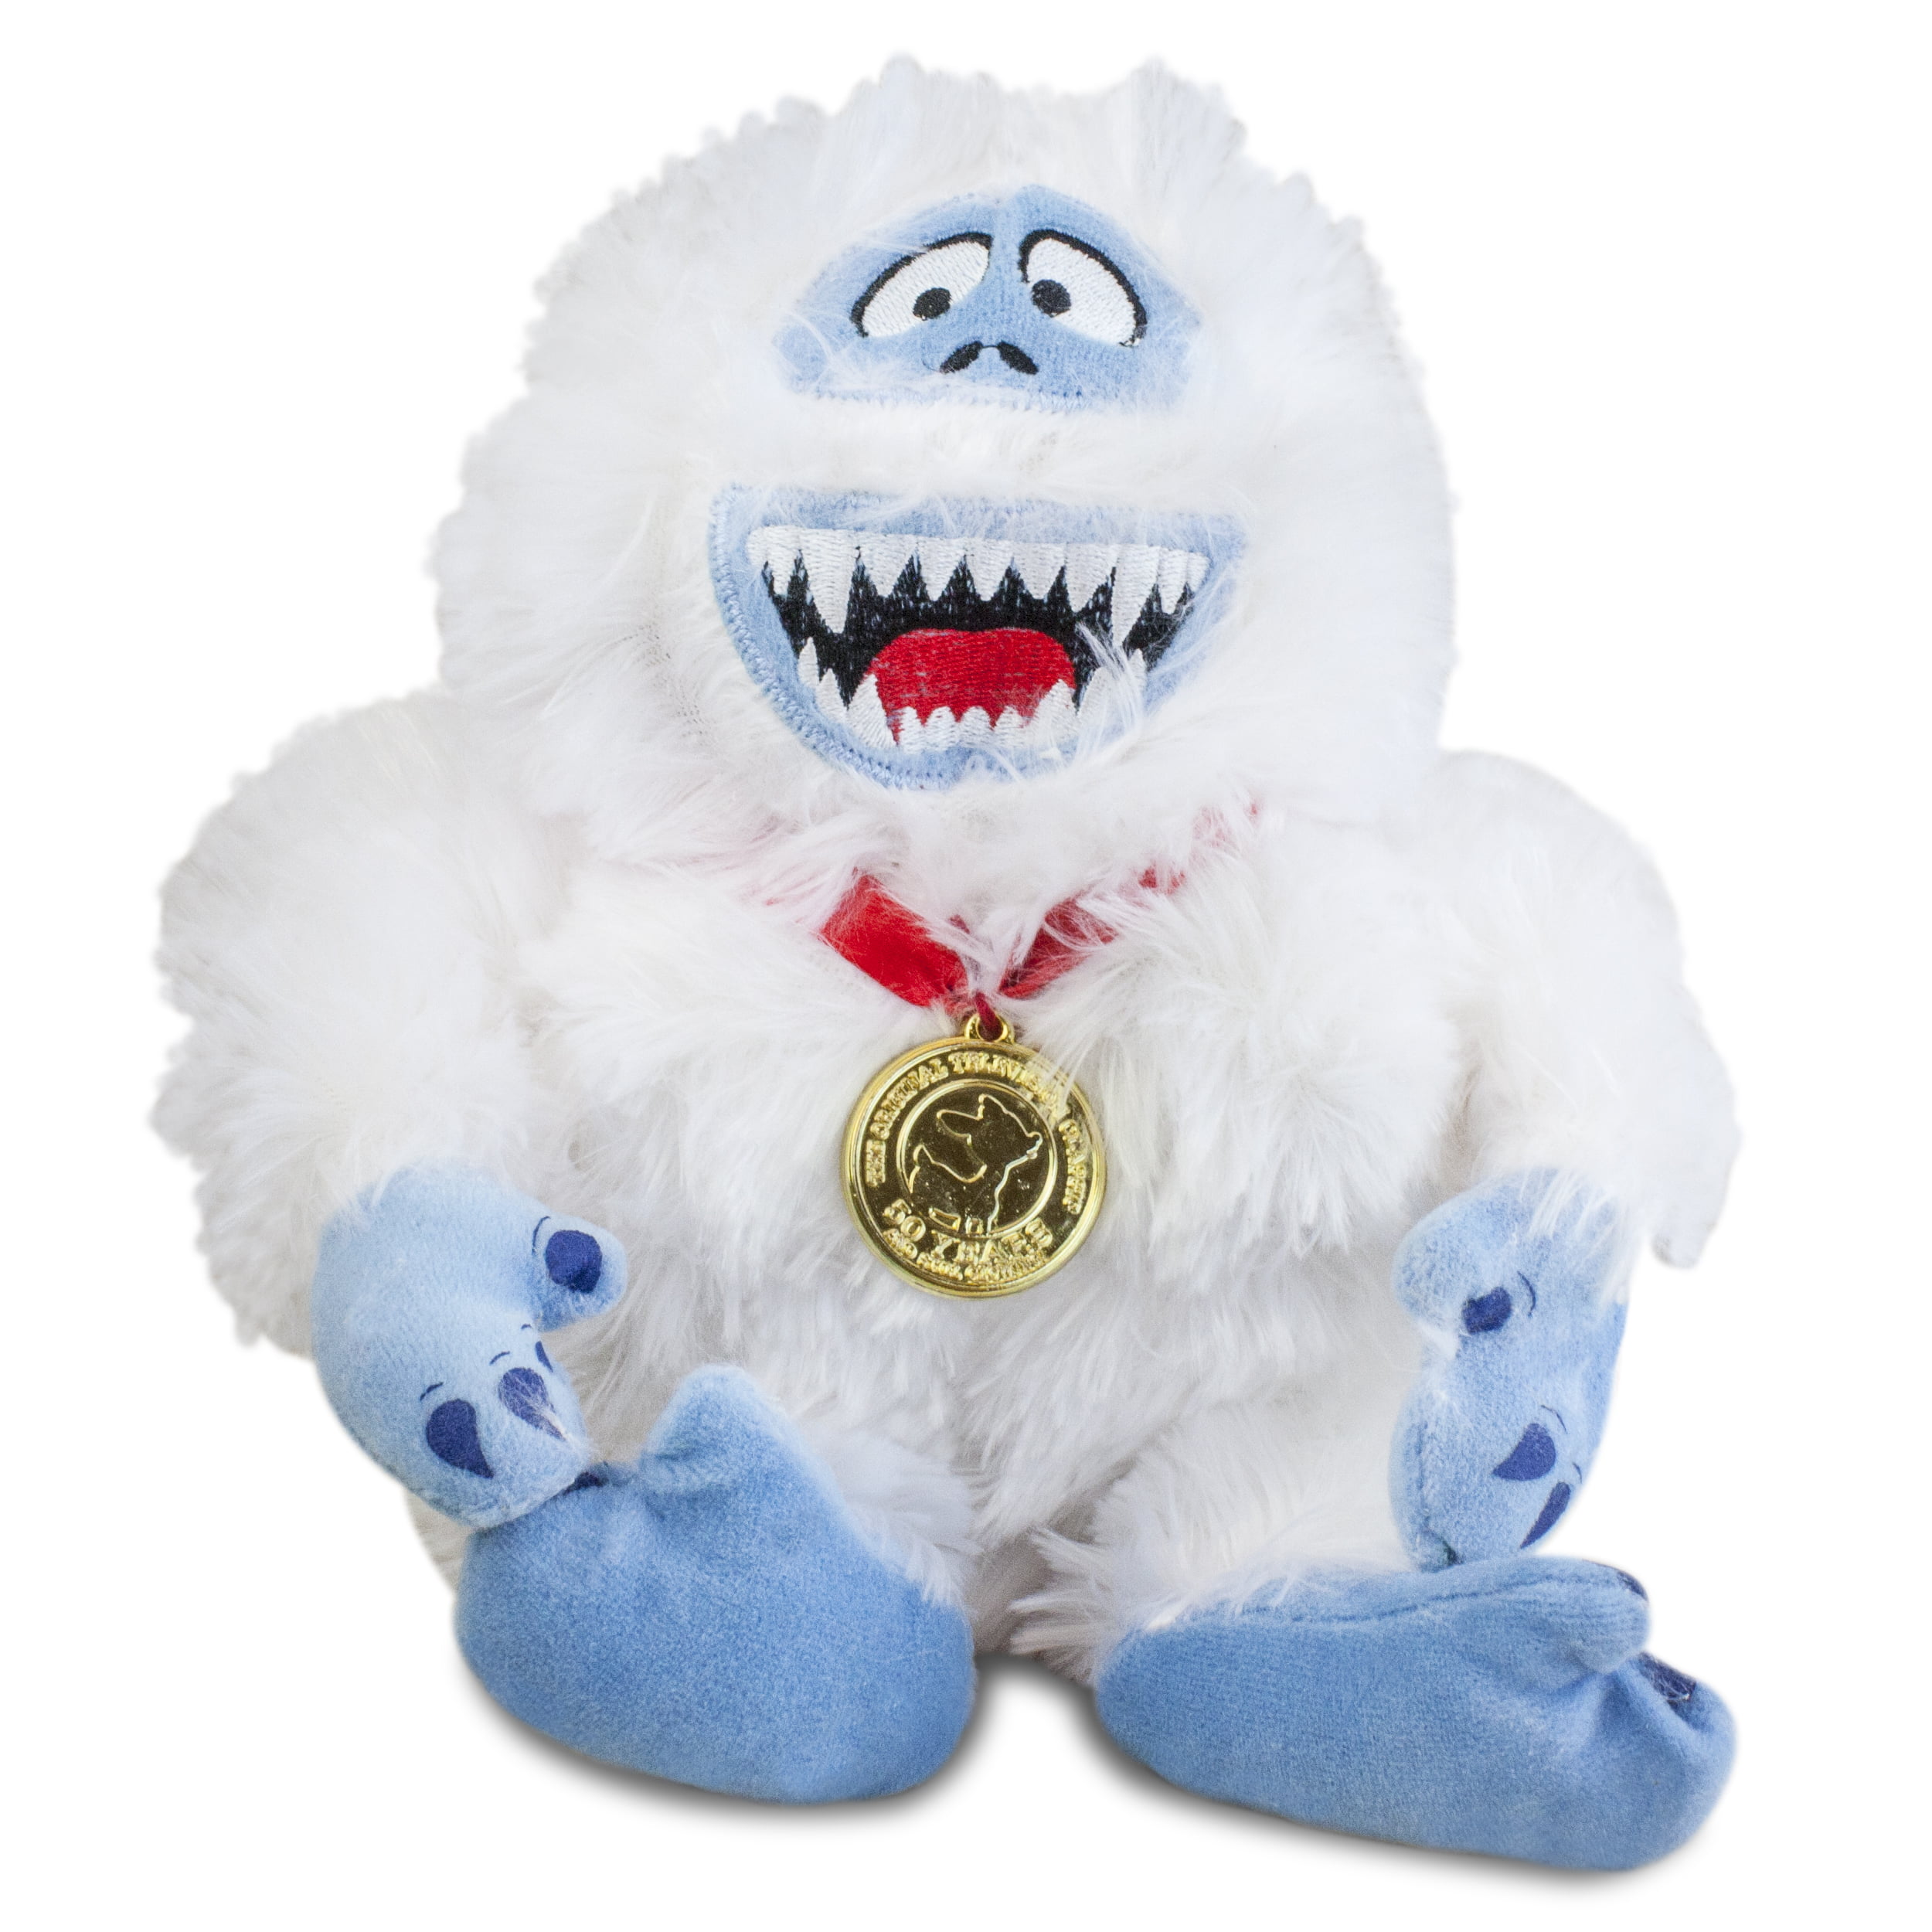 Details about   New Abominable Snowman Rudolph The Red Nose Reindeer Plush 16” Stuffed Animal